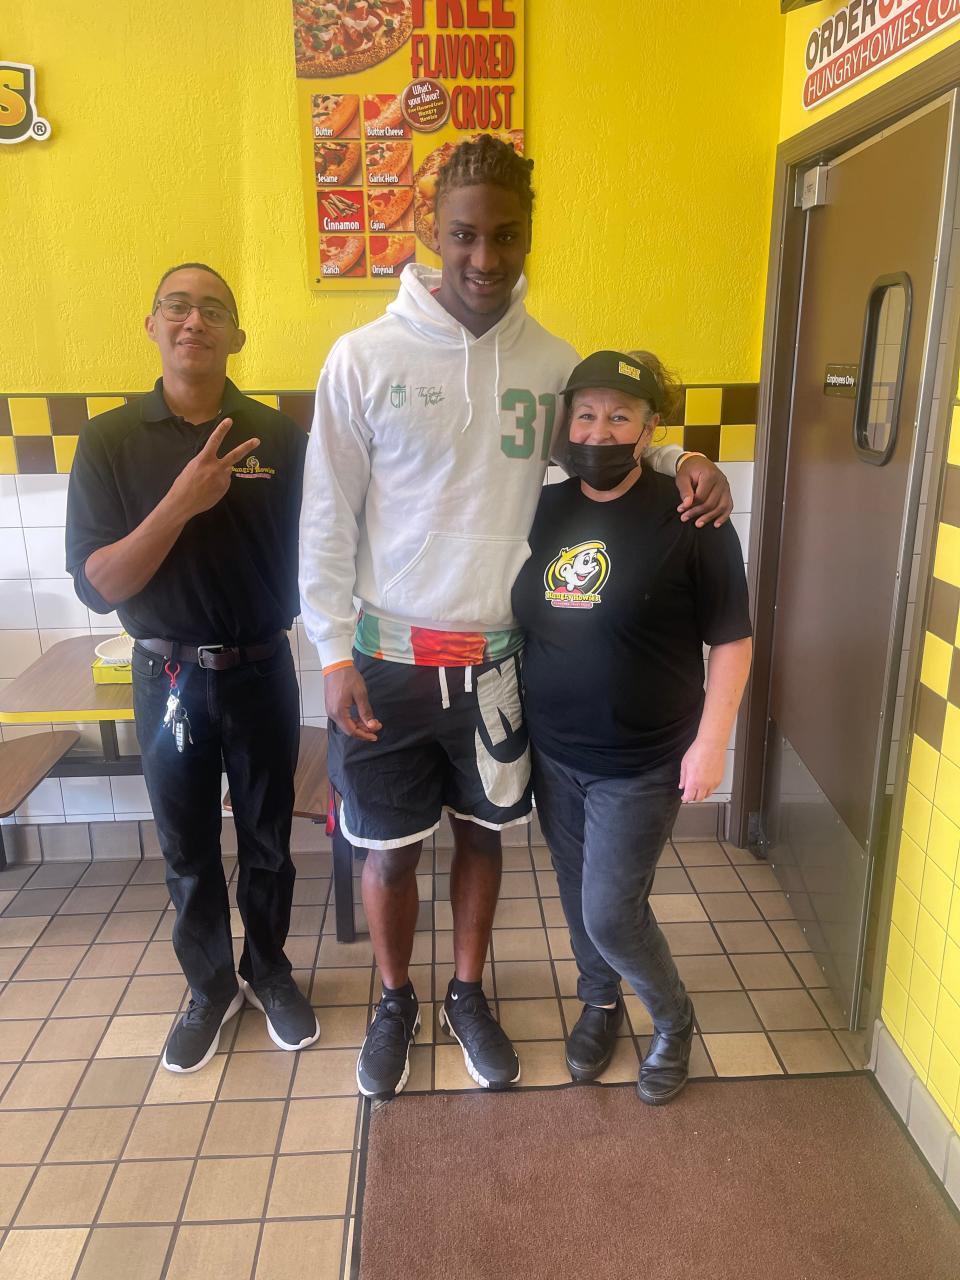 Florida A&M University linebacker Isaiah Land (middle) poses for photo with Hungry Howie’s Pizza general manager David Lopez (left) and employee Debbie Wallace (right) during NIL appearance at Apalachee Parkway location in Tallahassee, Florida, Wednesday, Nov. 2, 2022